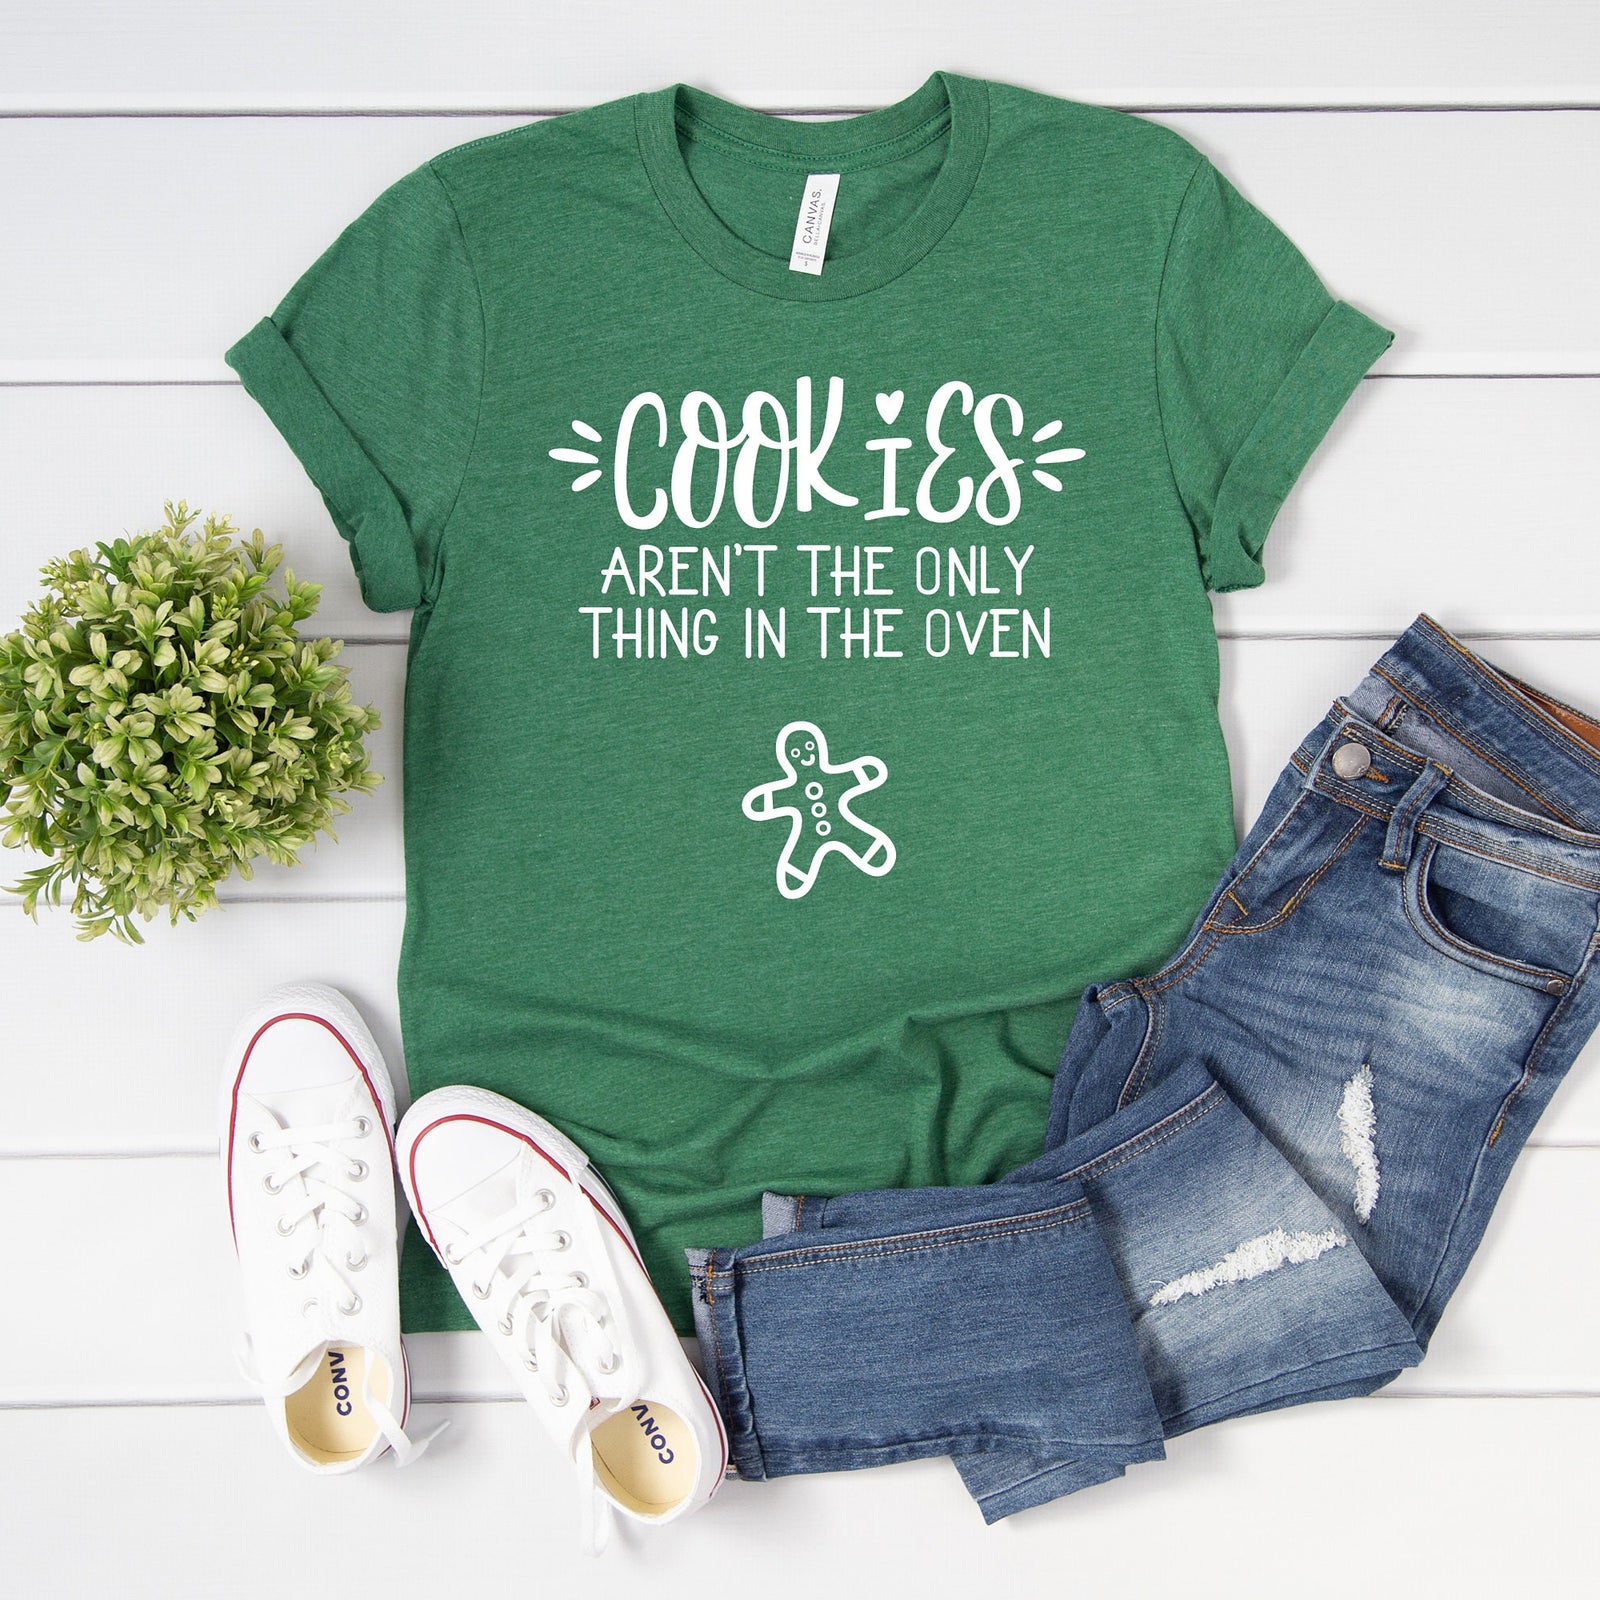 Cookies Aren't the Only Thing in the Oven Christmas T Shirt - Funny Pregnancy Announcement T Shirt - Christmas Baby Announcement Shirt